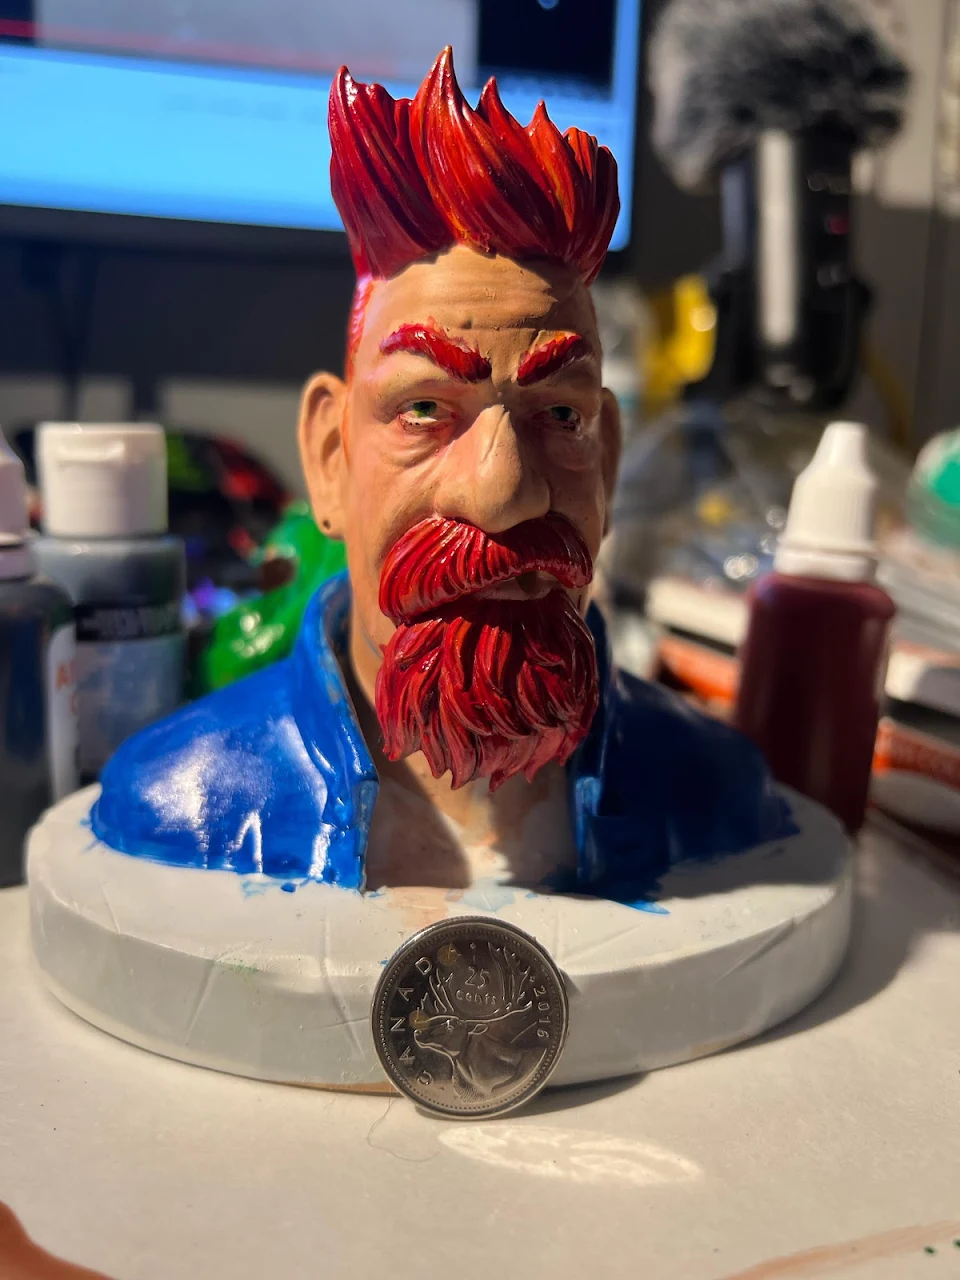 my first attempt (wip) at painting a small bust. CDN quarter for scale.